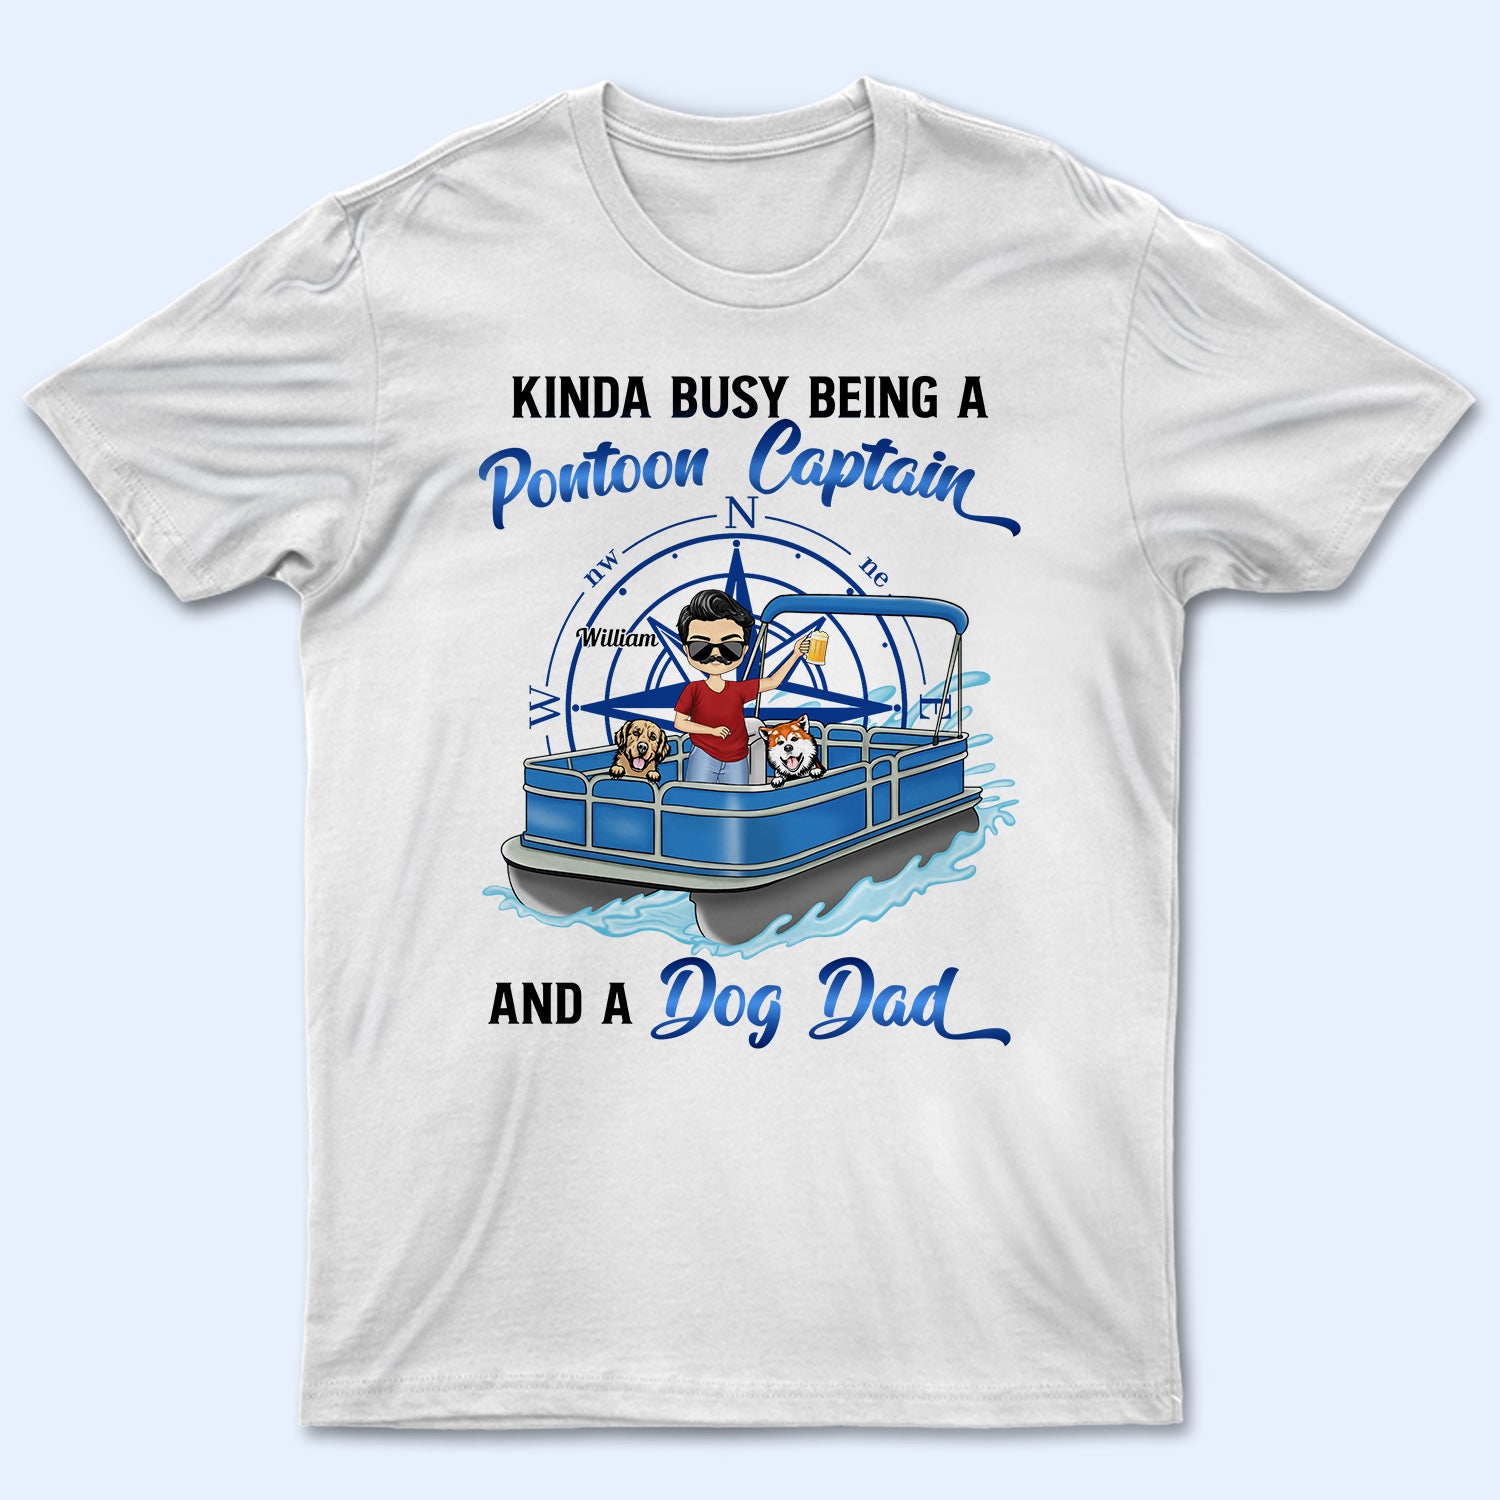 Kinda Busy Being A Pontoon Captain & A Dog Dad - Gift For Pontooning Lovers, Lake Lovers, Travelers, Pet Lovers - Personalized Custom T Shirt